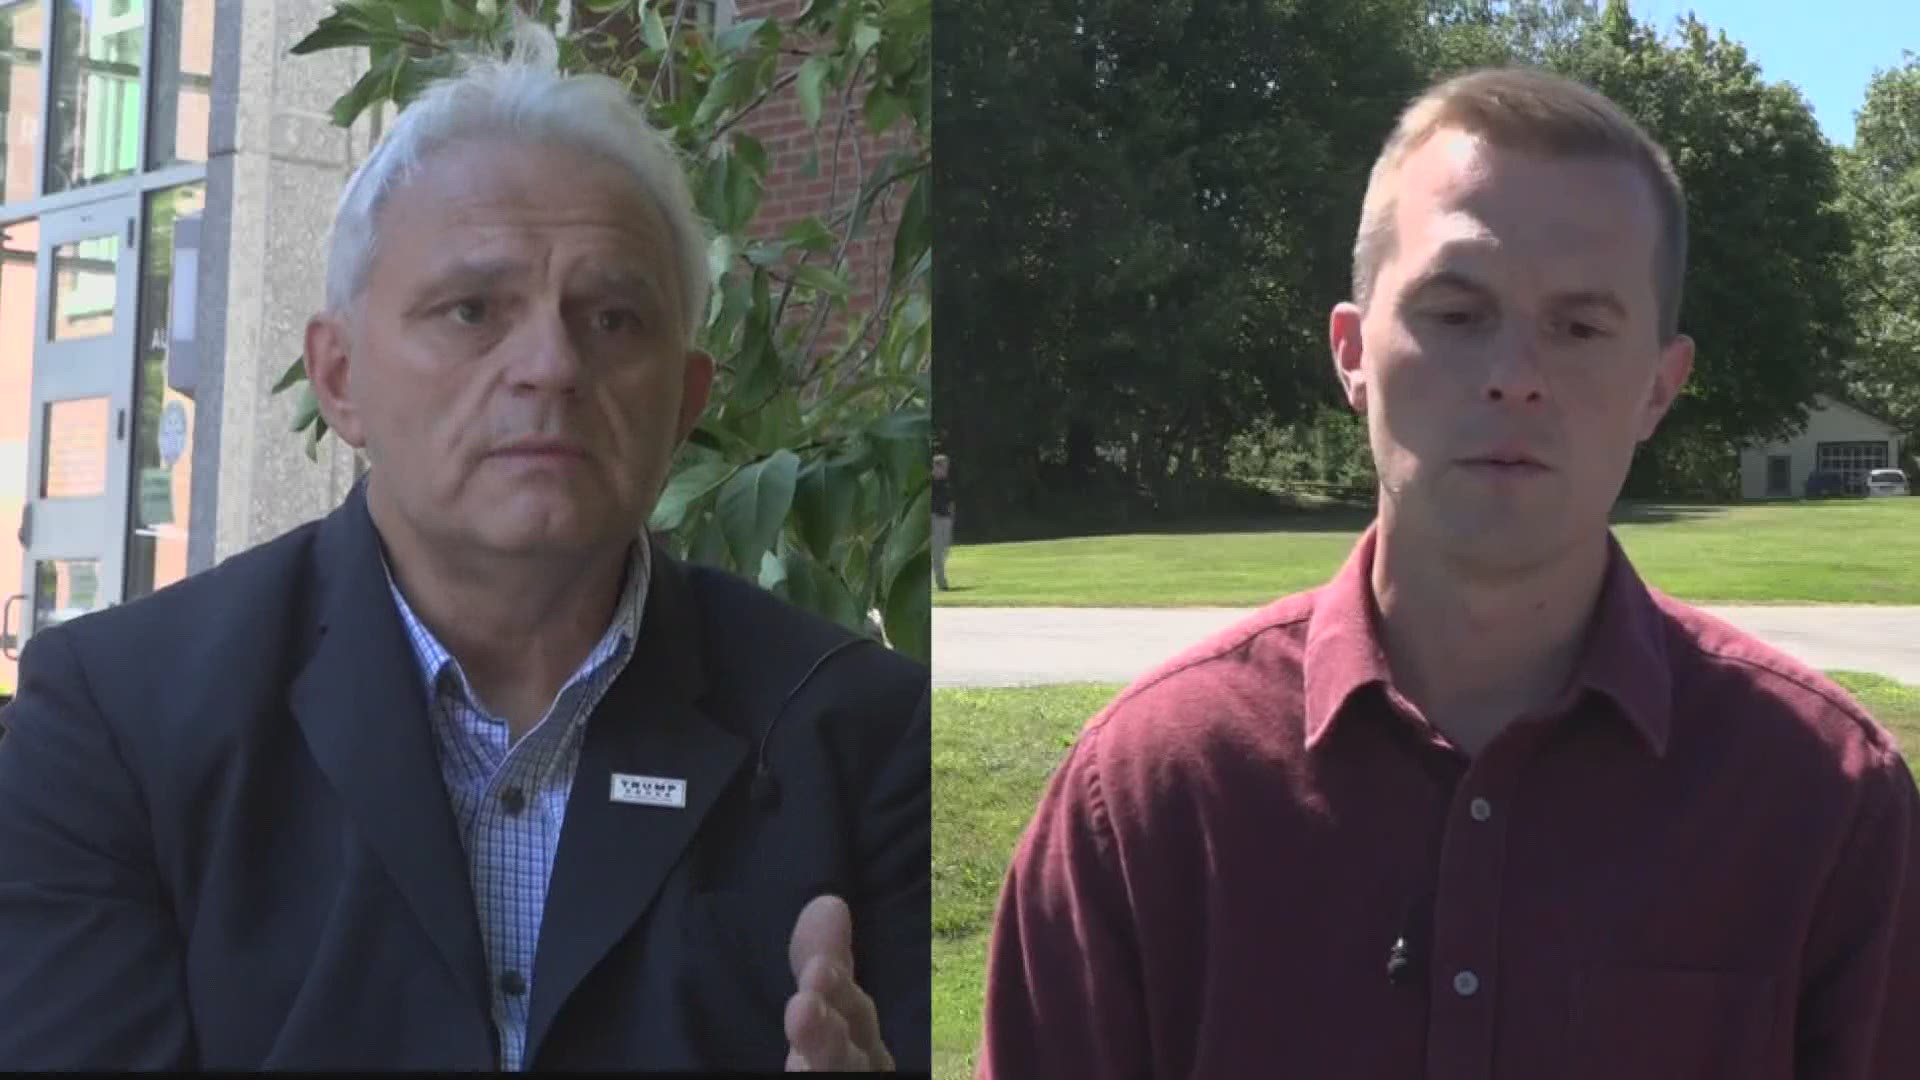 CD-2 candidates Jared Golden and Dale Crafts share how they're feeling ahead of the election